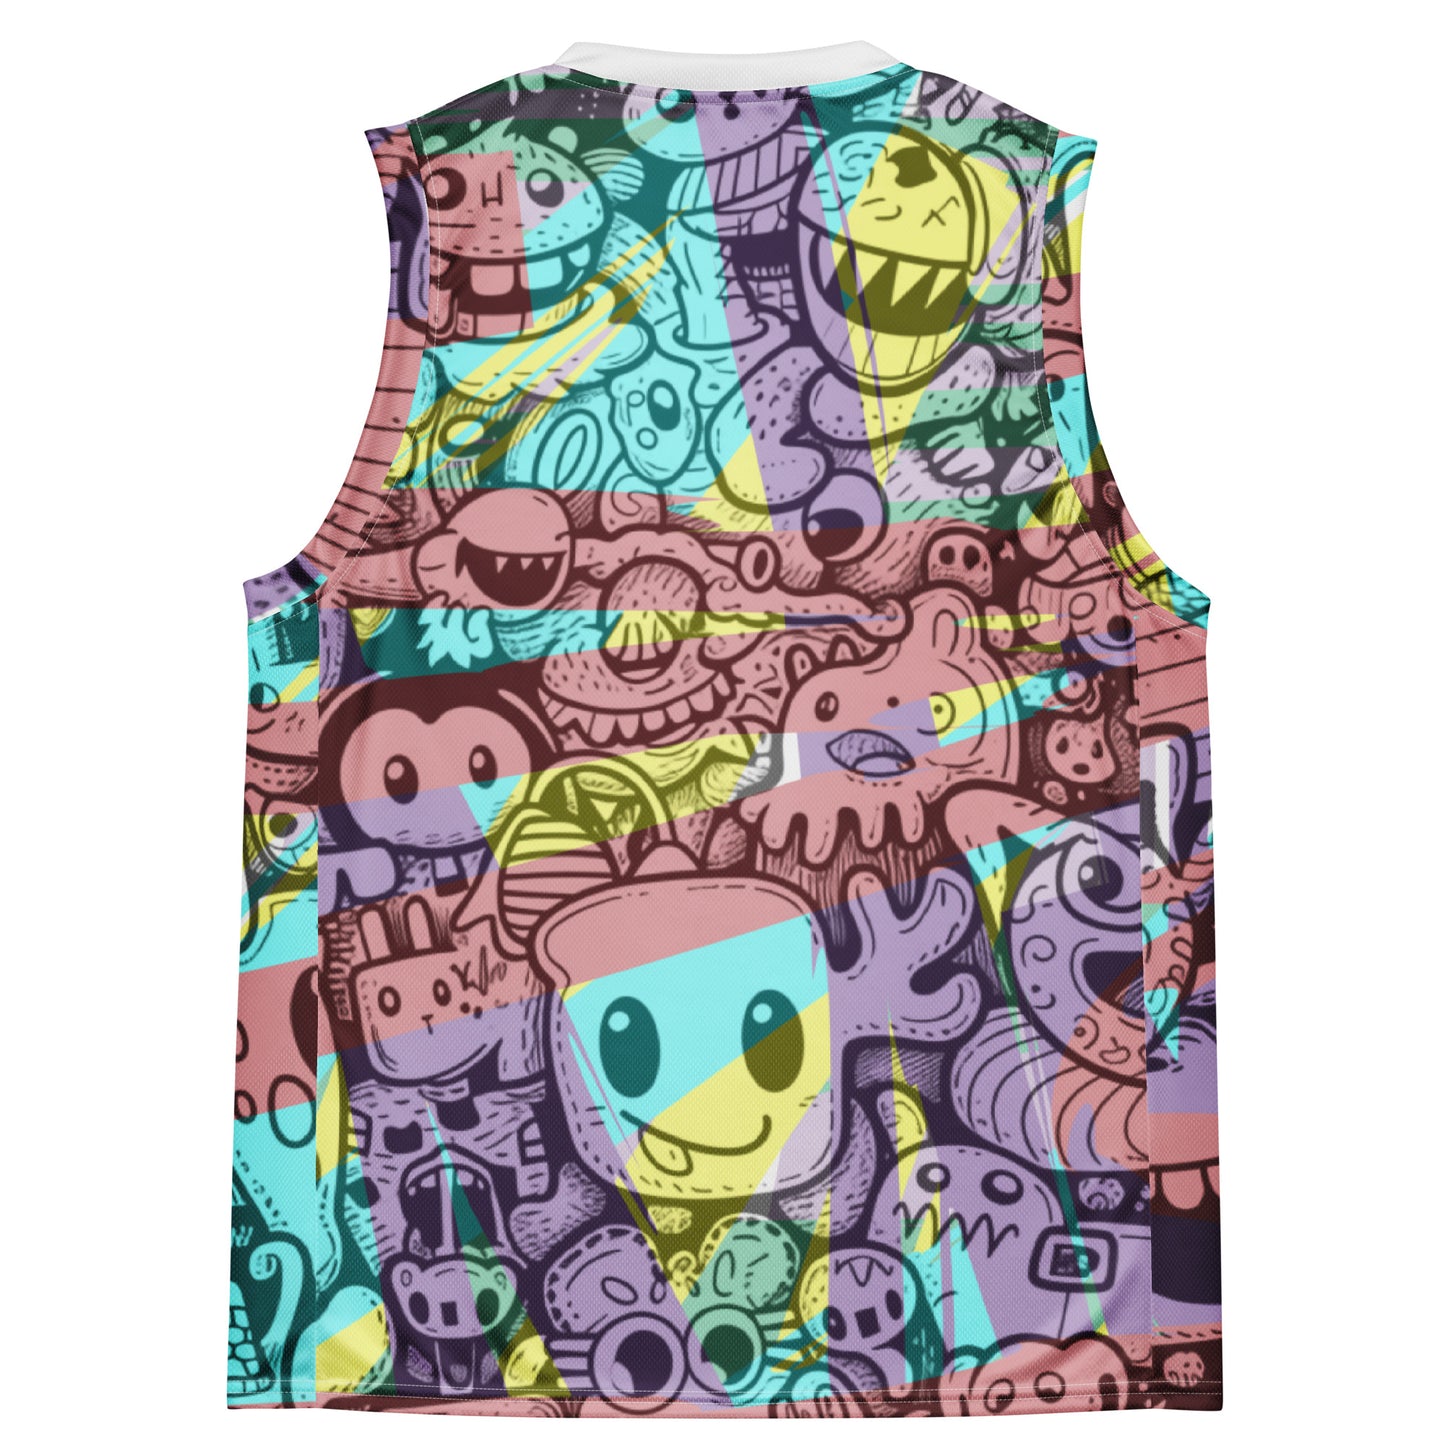 Kooky Toons (Most Wanted) #1 - Basketball Jersey